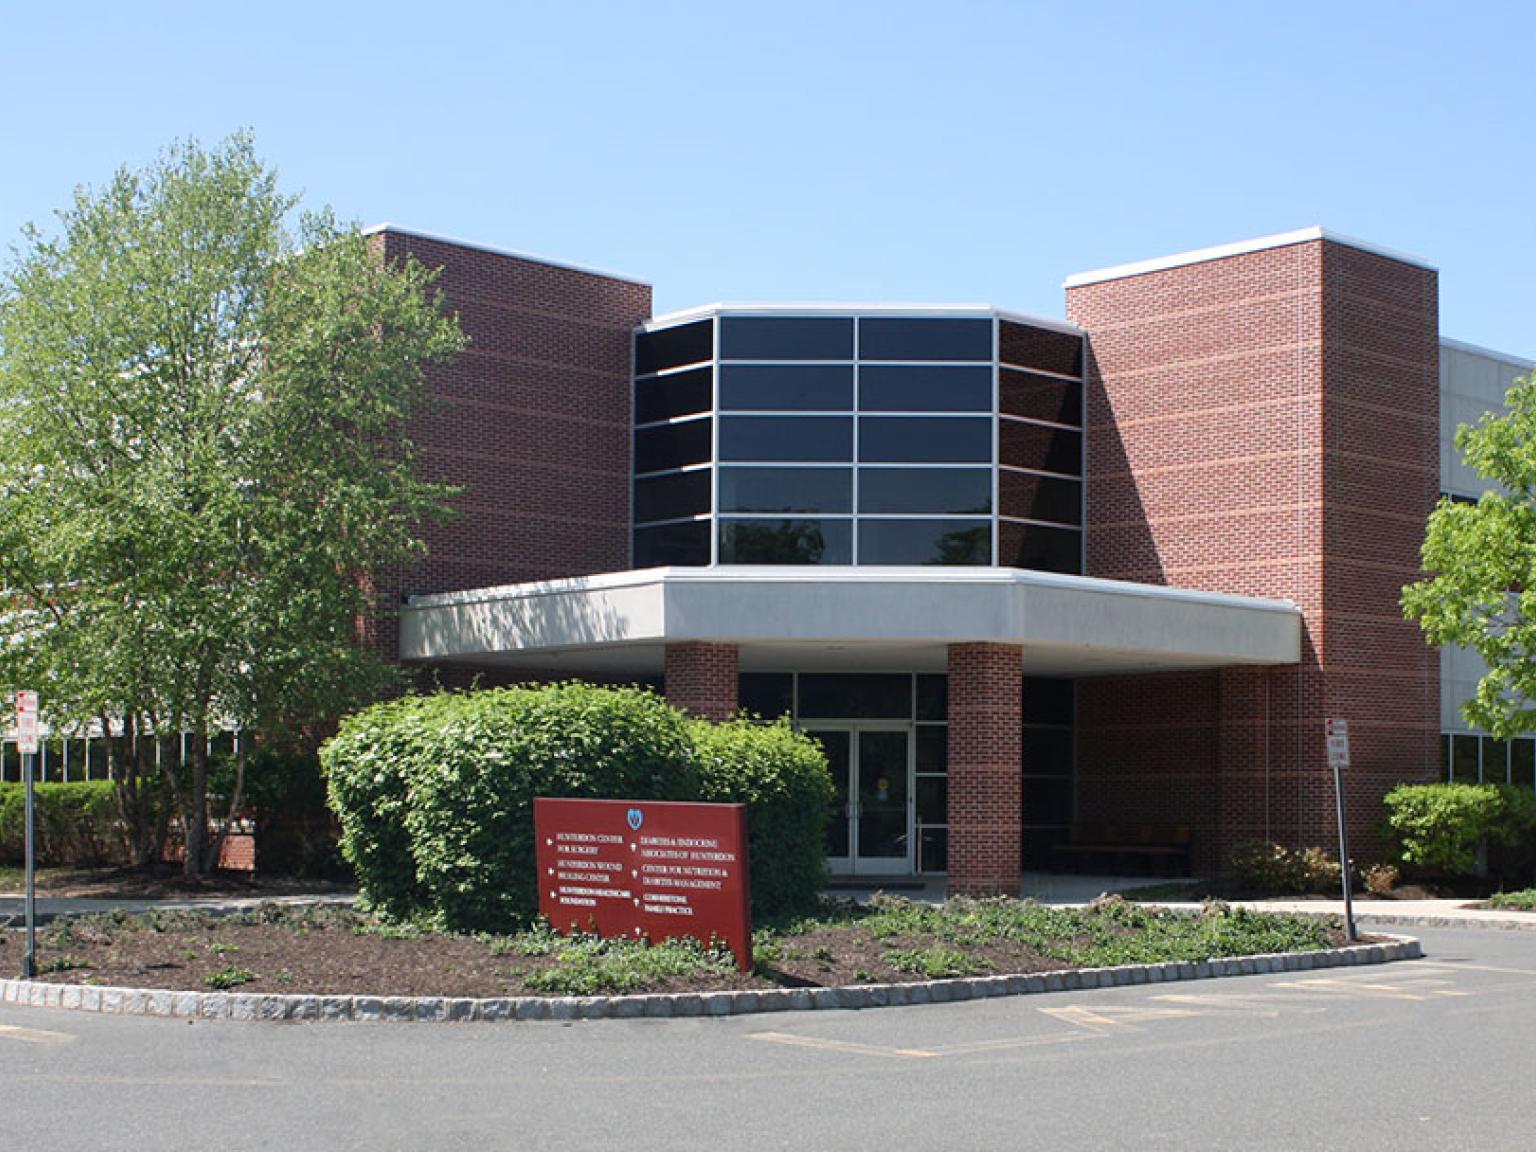 Photo of main entrance of the Wescott Medical Arts Building